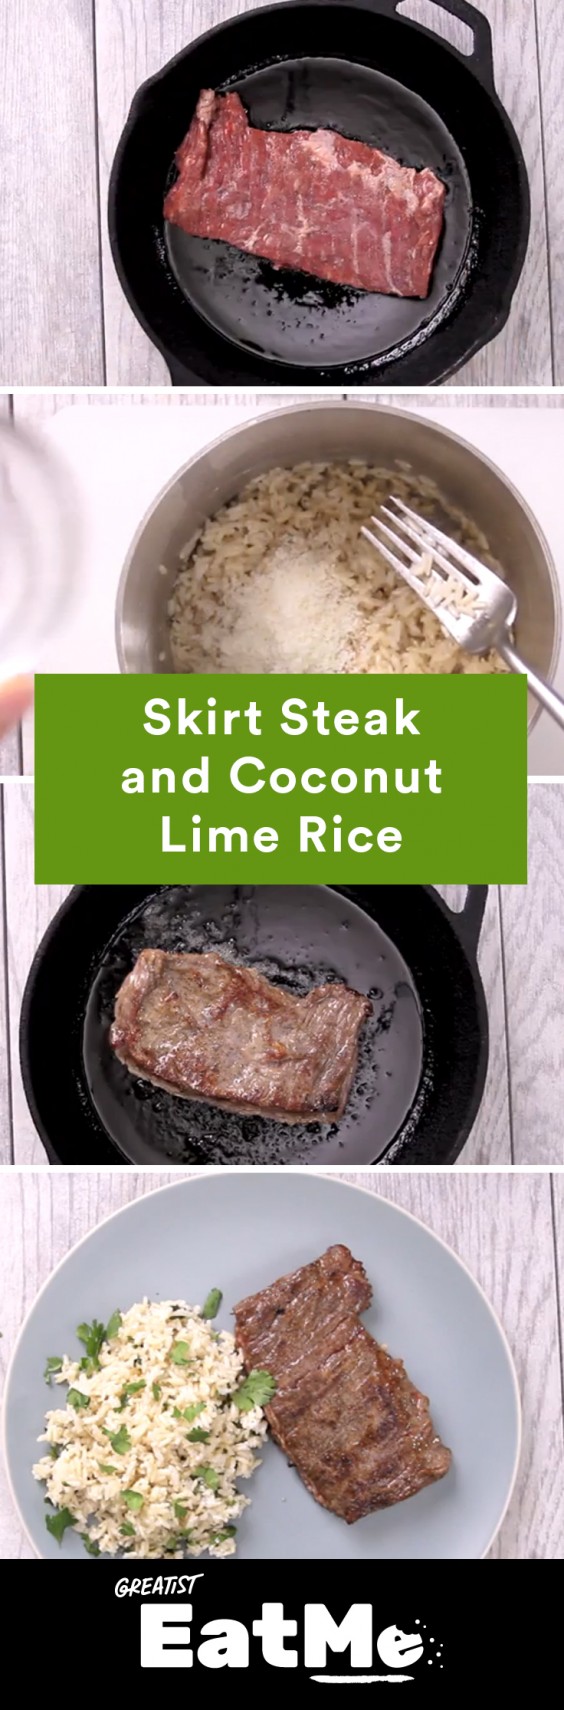 Eat Me Video: Skirt Steak and Coconut Rice